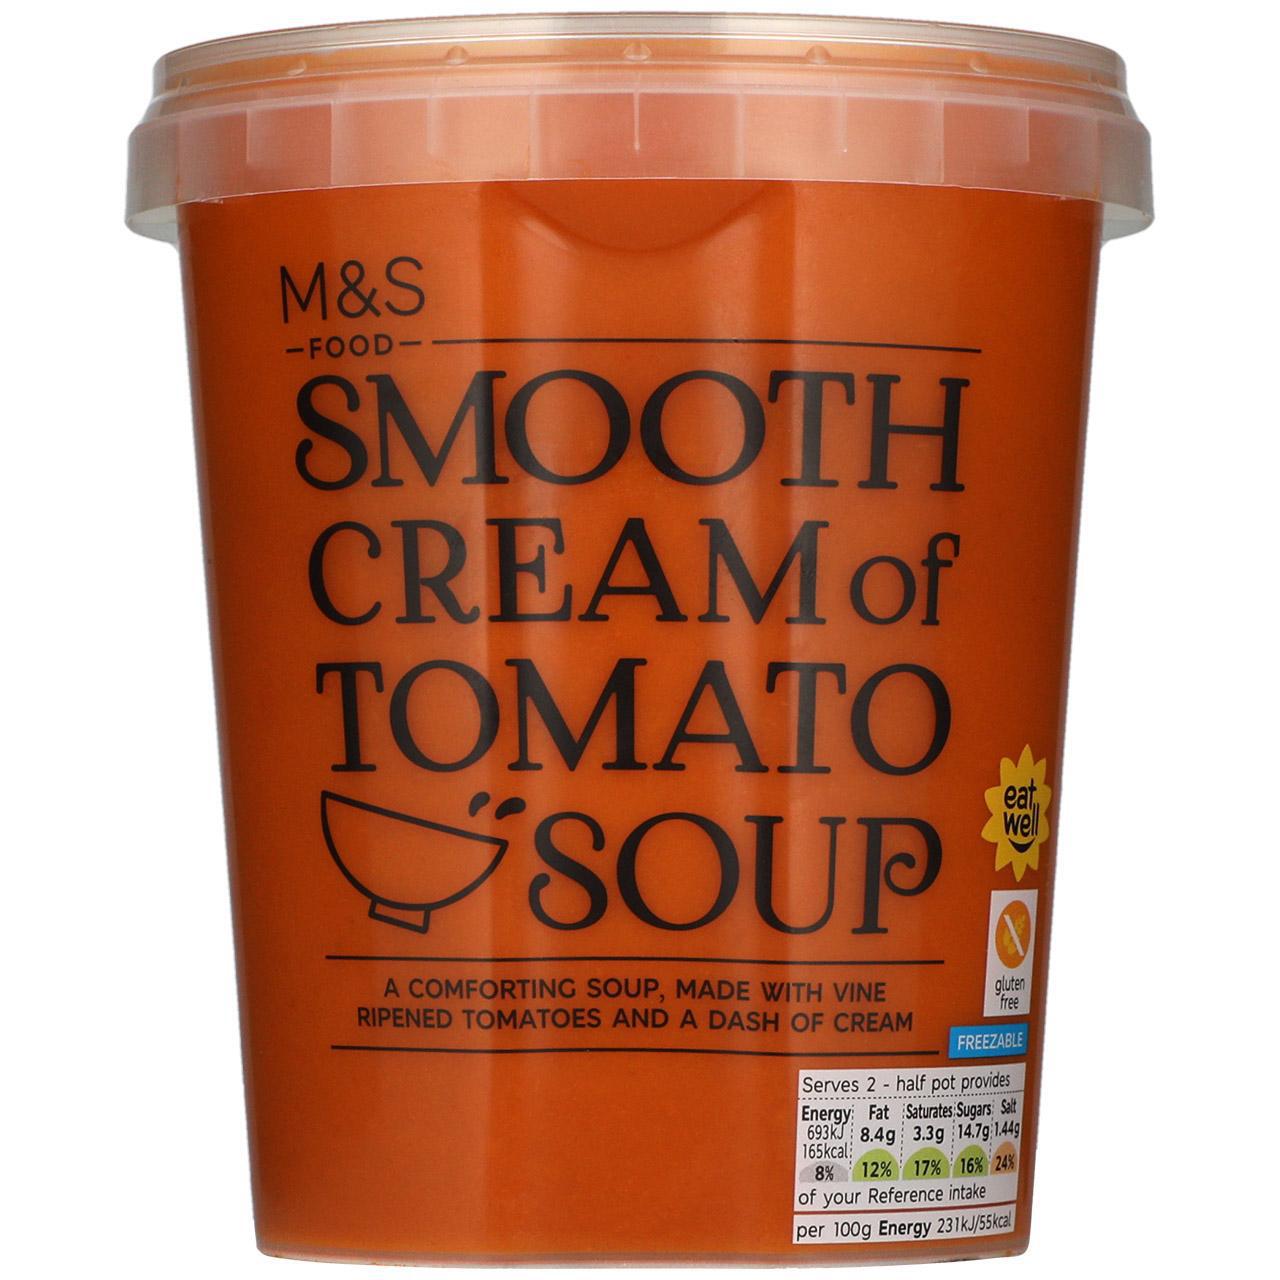 M&S Smooth Cream of Tomato Soup 600g